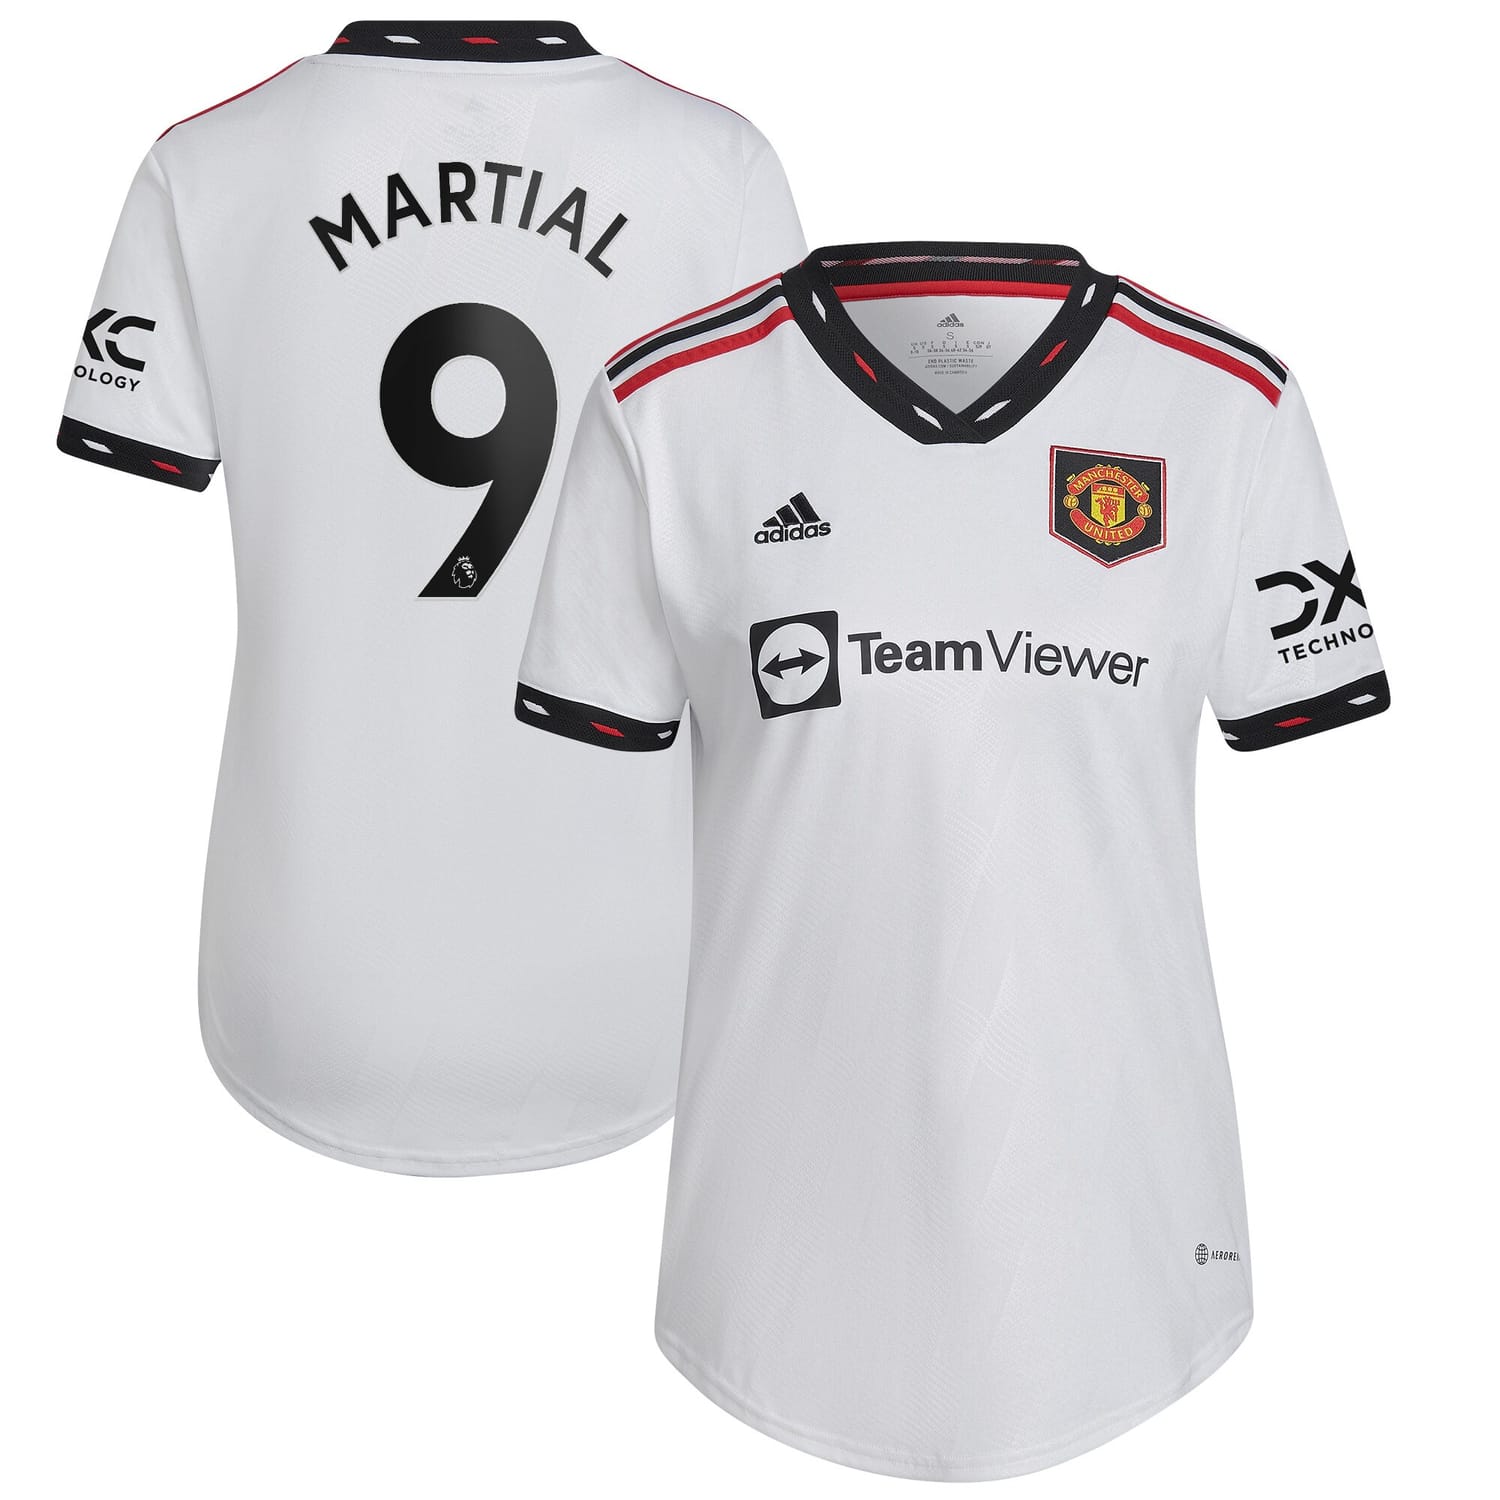 Premier League Manchester United Away Jersey Shirt White 2022-23 player Anthony Martial printing for Women